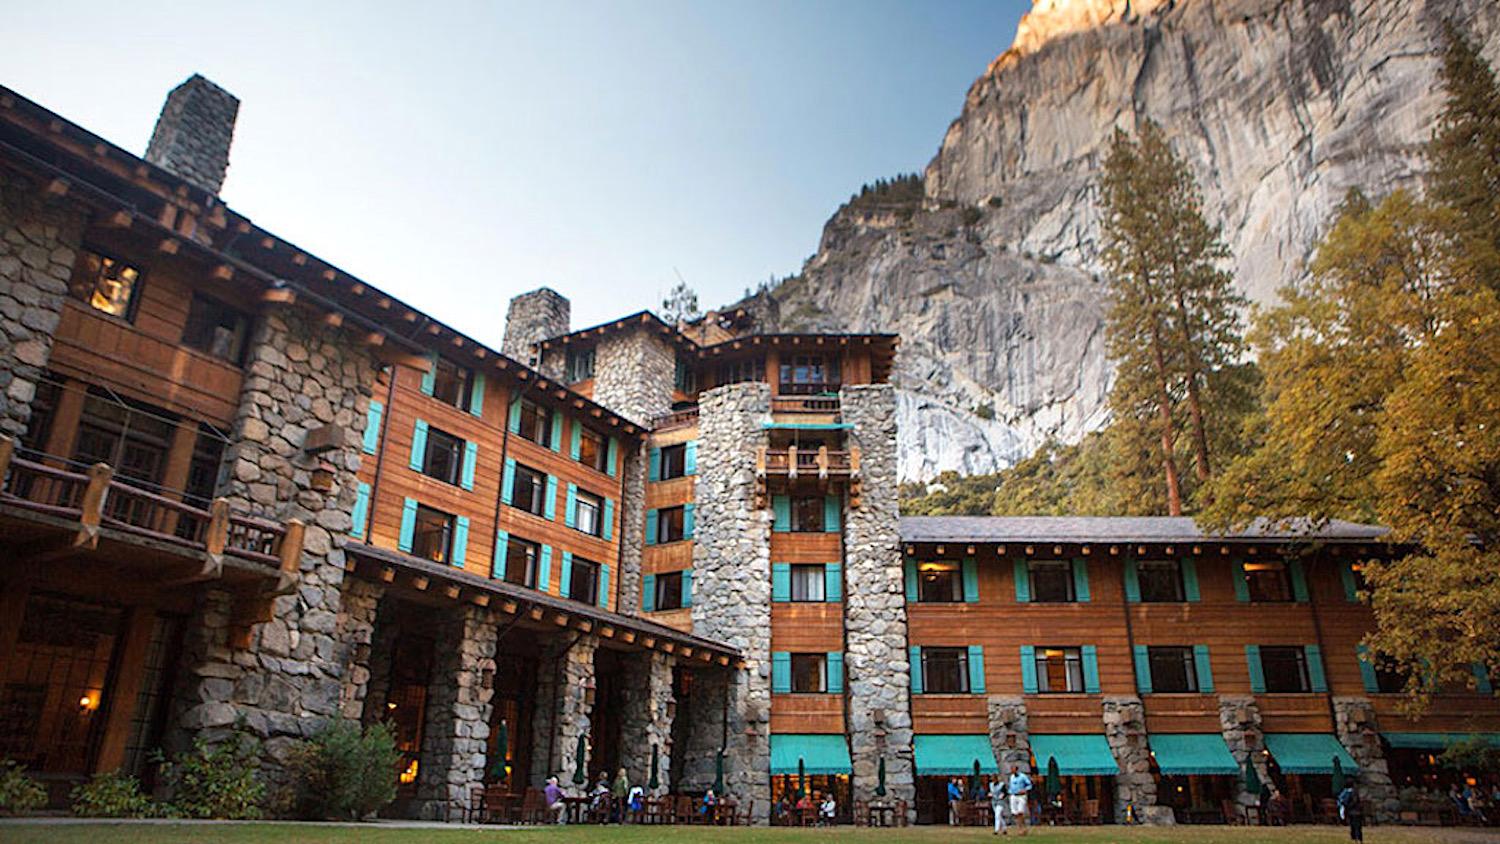 The Ahwahnee Hotel at Yosemite National Park is benefitting greatly from the Great American Outdoor Act/NPS file